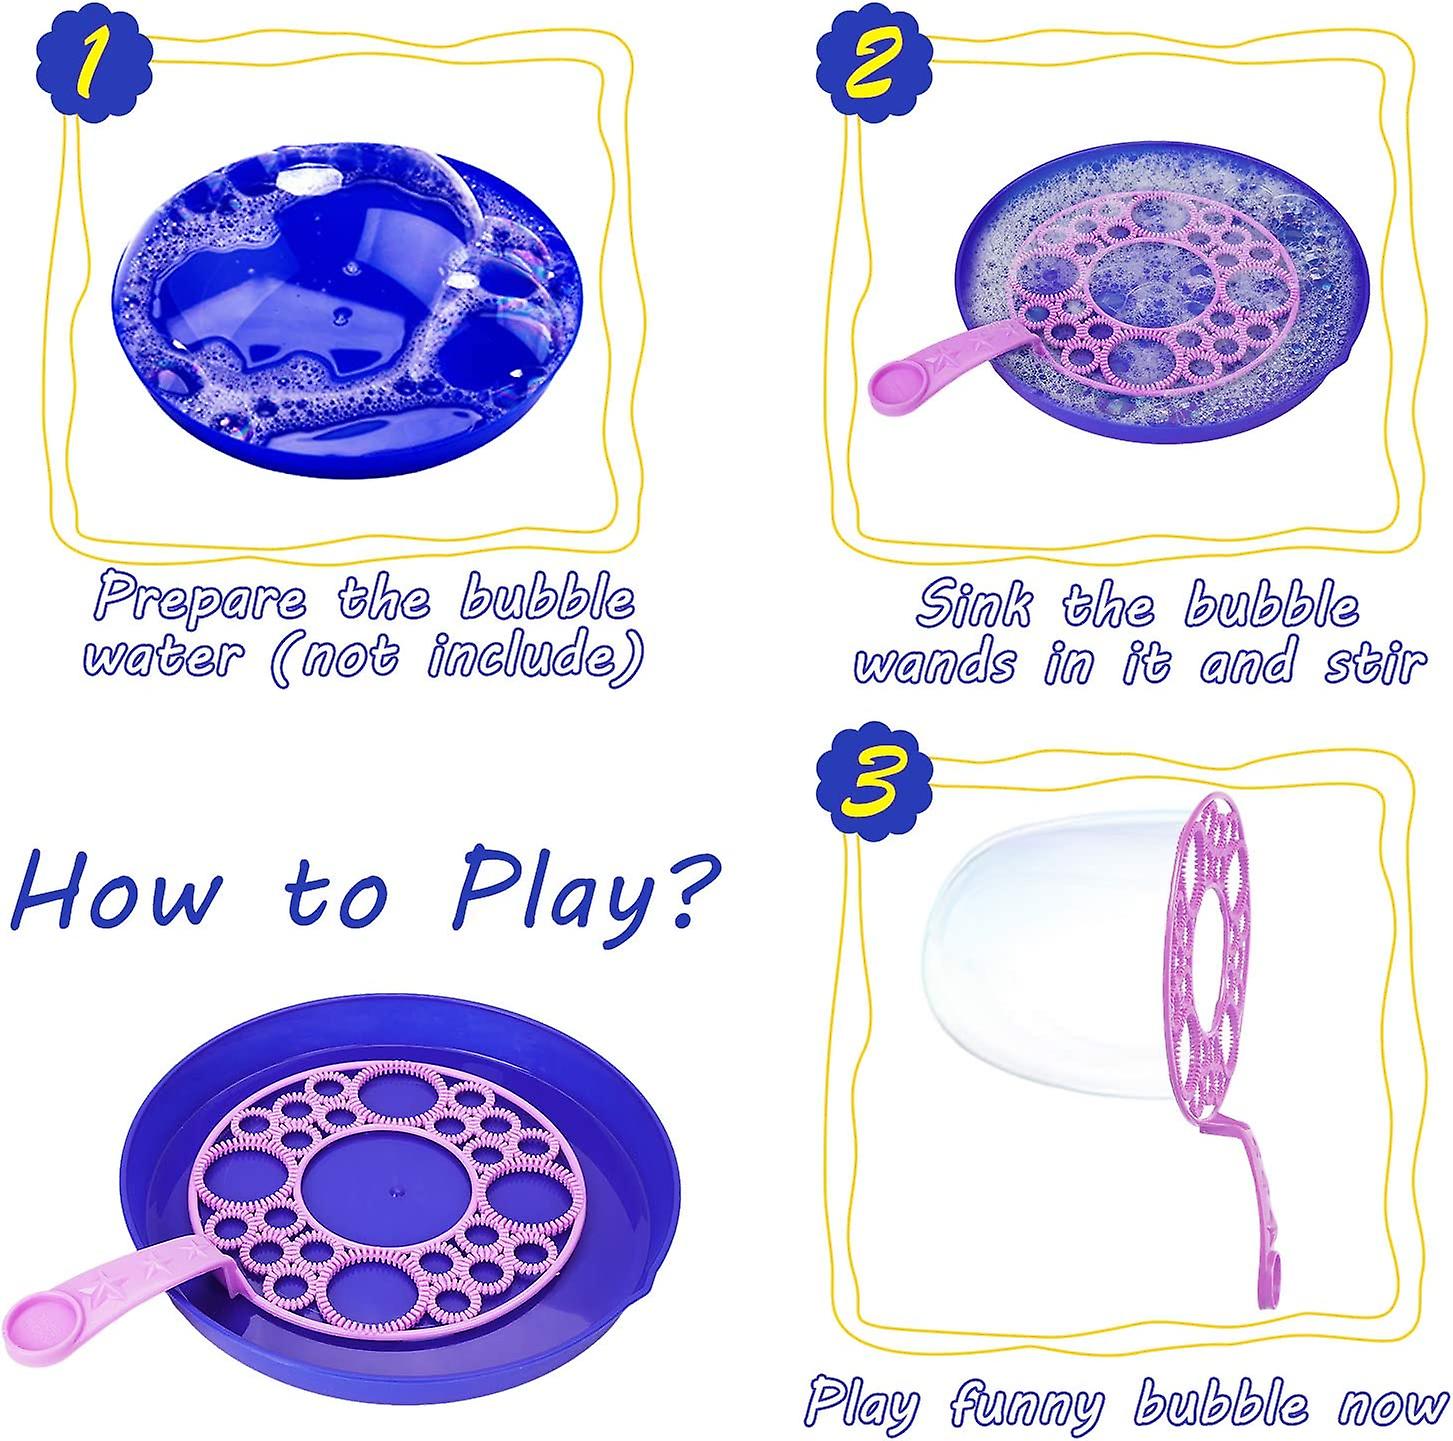 Big Bubble Wands Set: Bubbles Wand Tray Funny Bubbles Maker， Nice For Outdoor Playtime and Birthday Party and Games， Suitable For All Age People